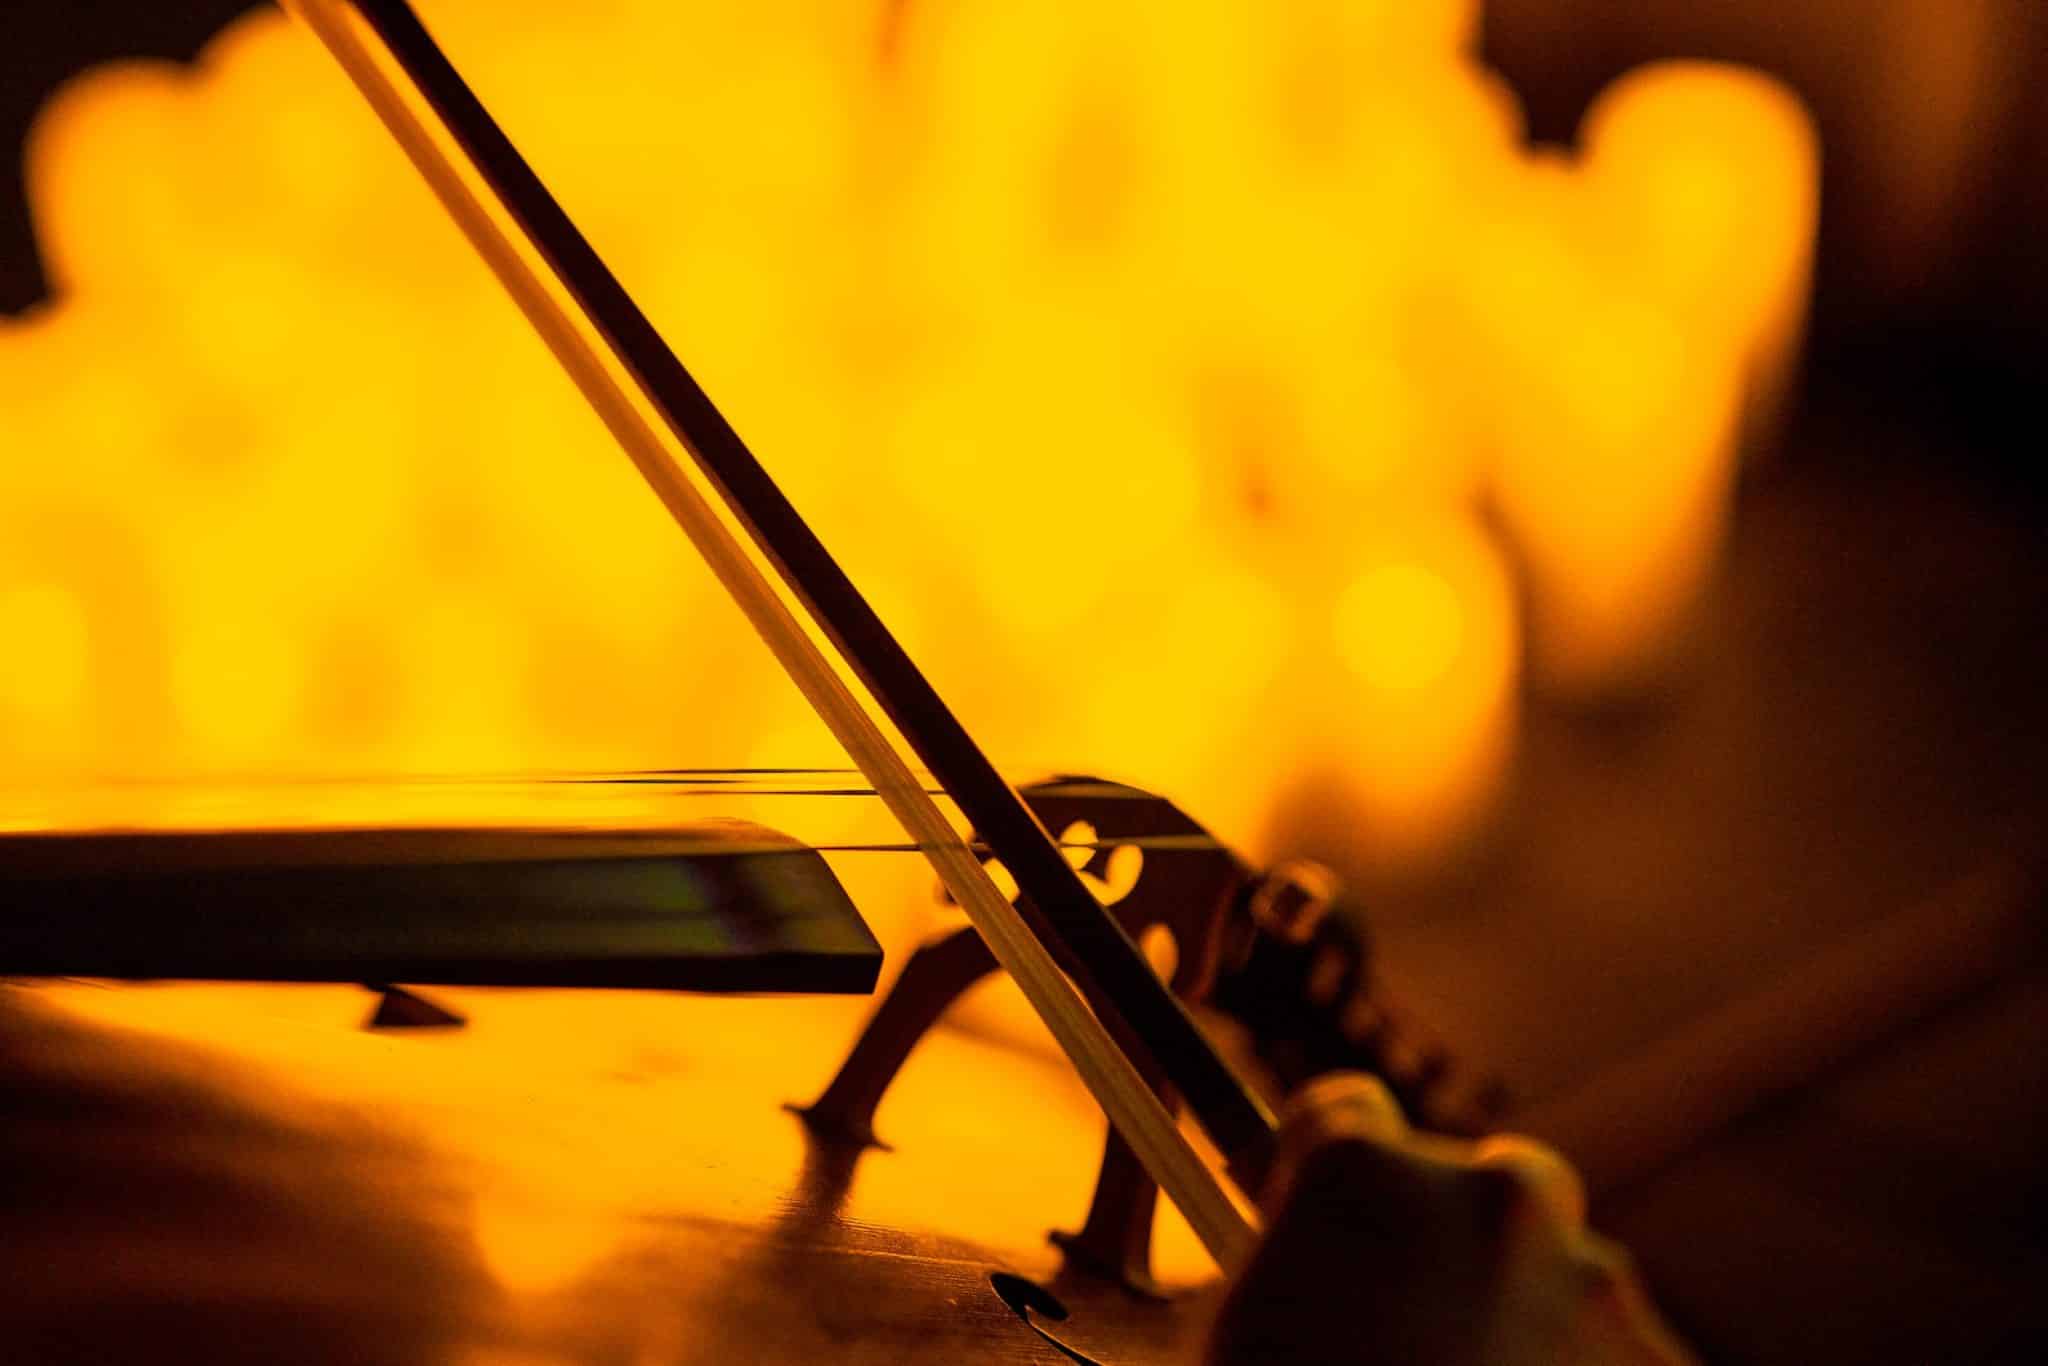 A close-up of a bow being used to play a string instrument with the glow of candles in the background at a Candlelight concert.